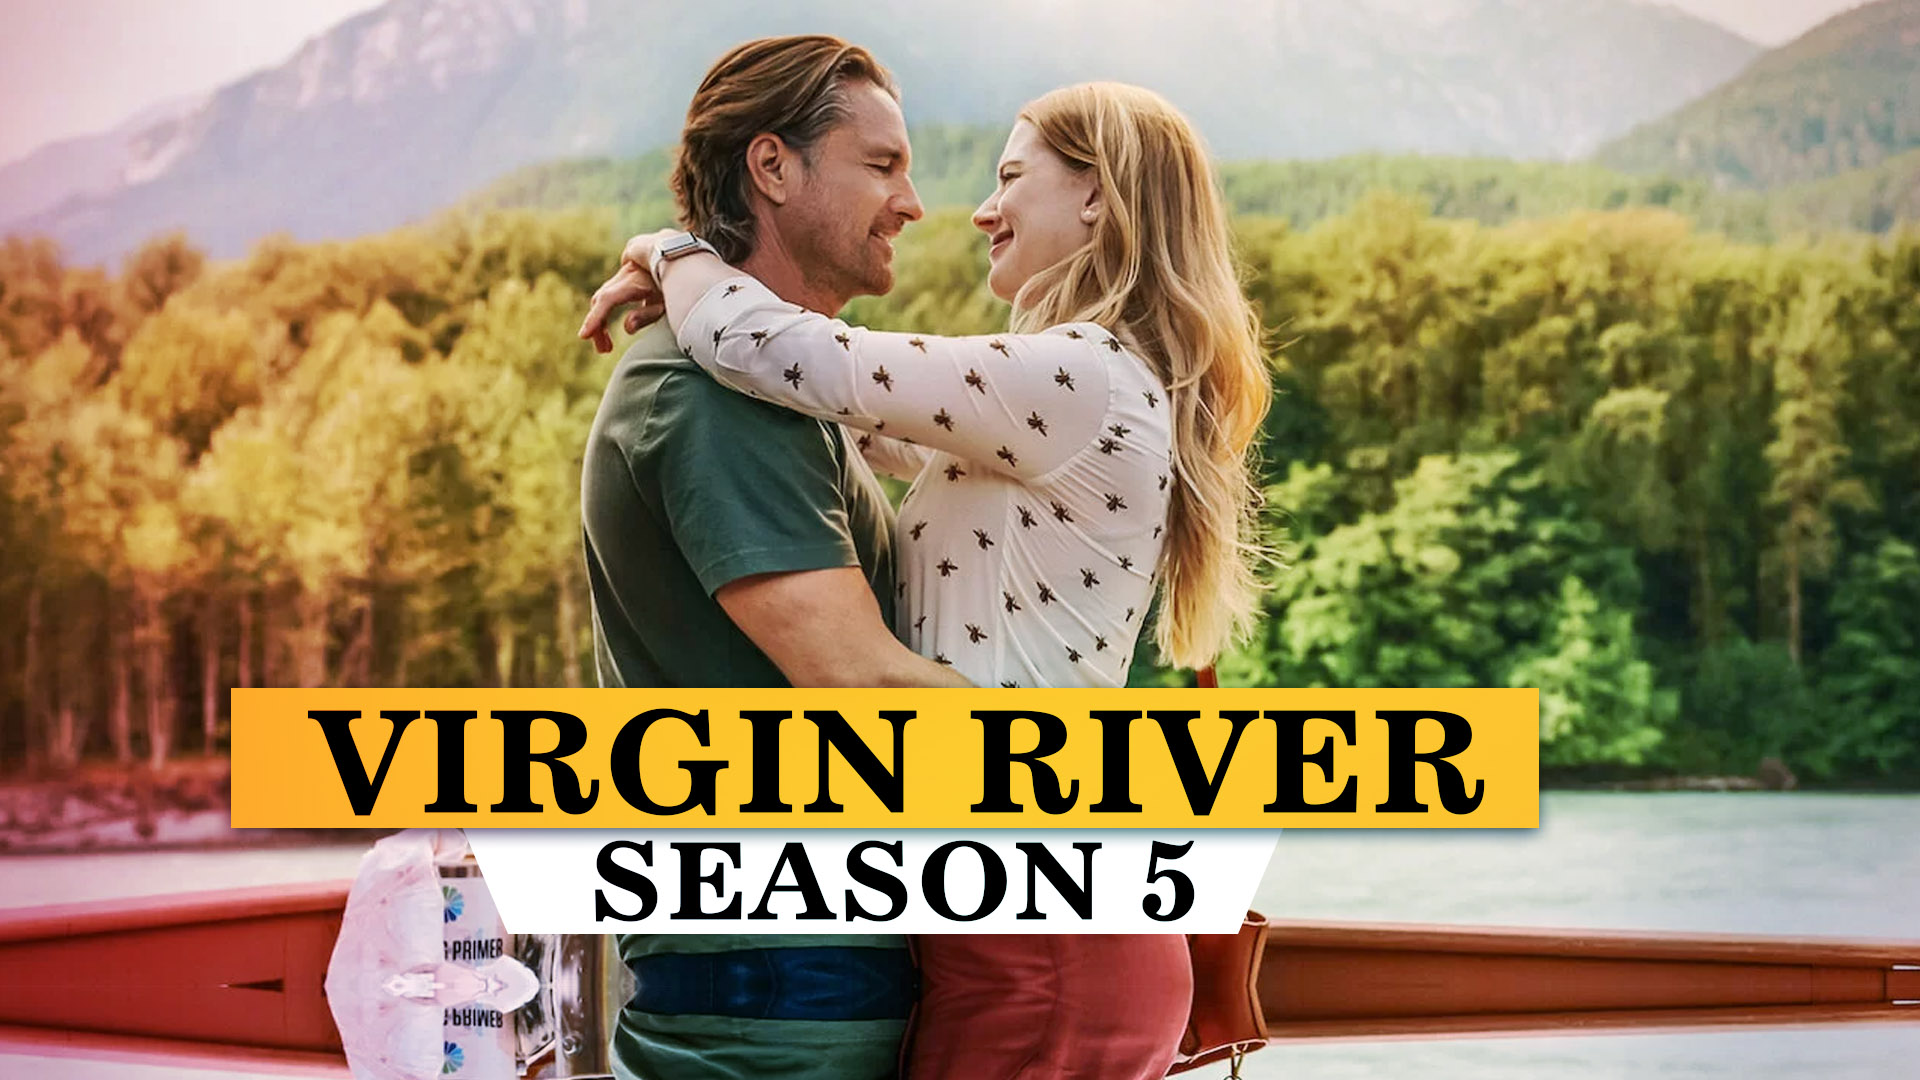 Virgin River Season 5 Is Coming With The New Casts And A Season 6 Announcement Daily Research Plot